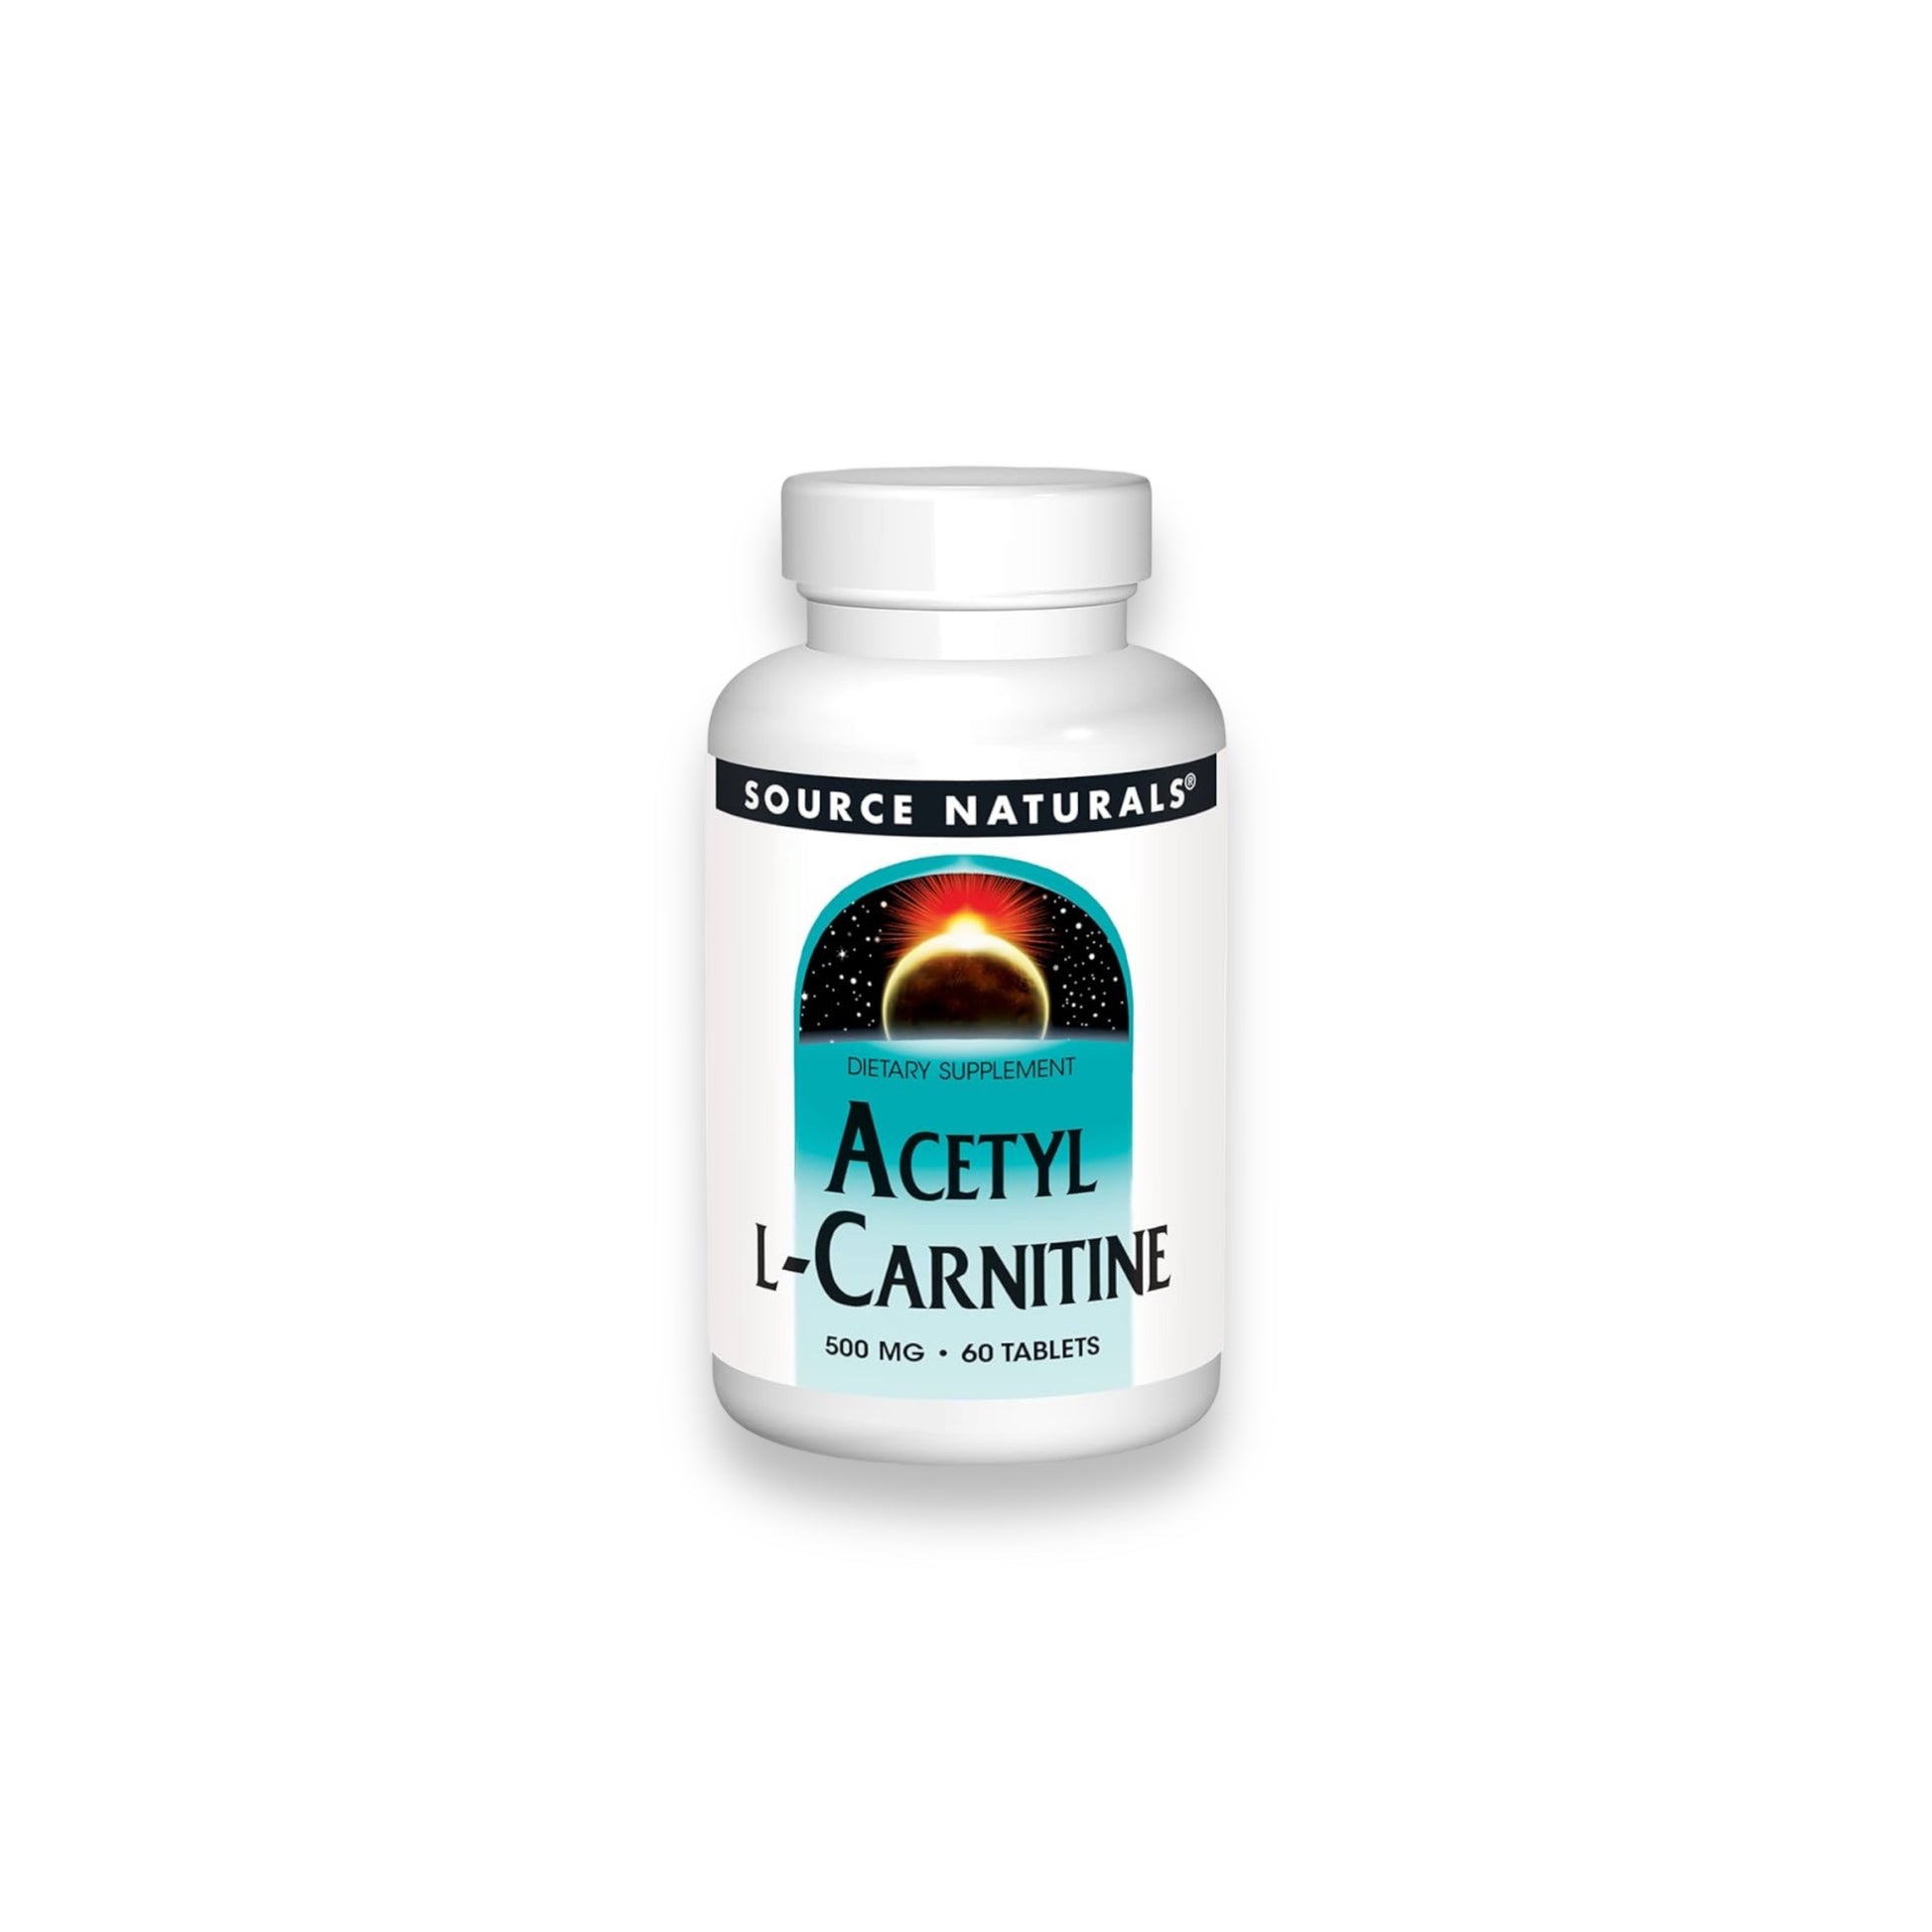 Source Naturals Acetyl L-Carnitine 60 Tabs